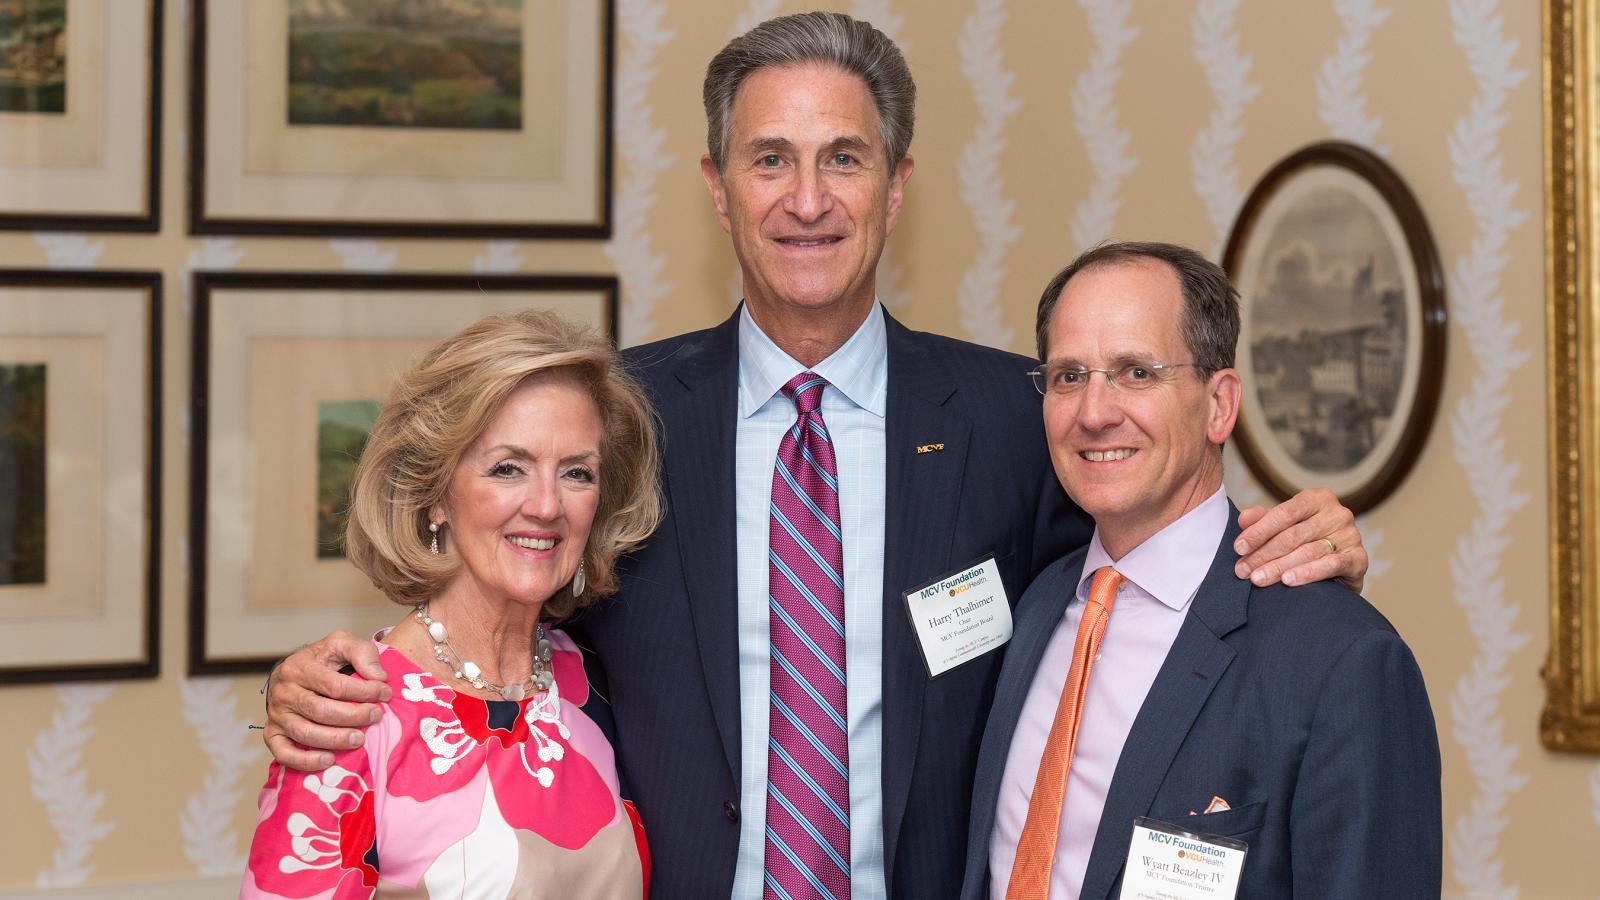 Gail Johnson and Harry Thalhimer, two past MCV Foundation board chairs, gather with Wyatt Beazley IV, current MCV Foundation board chair, at the foundation’s annual dinner and awards ceremony in 2019. Photos: Kevin Schindler